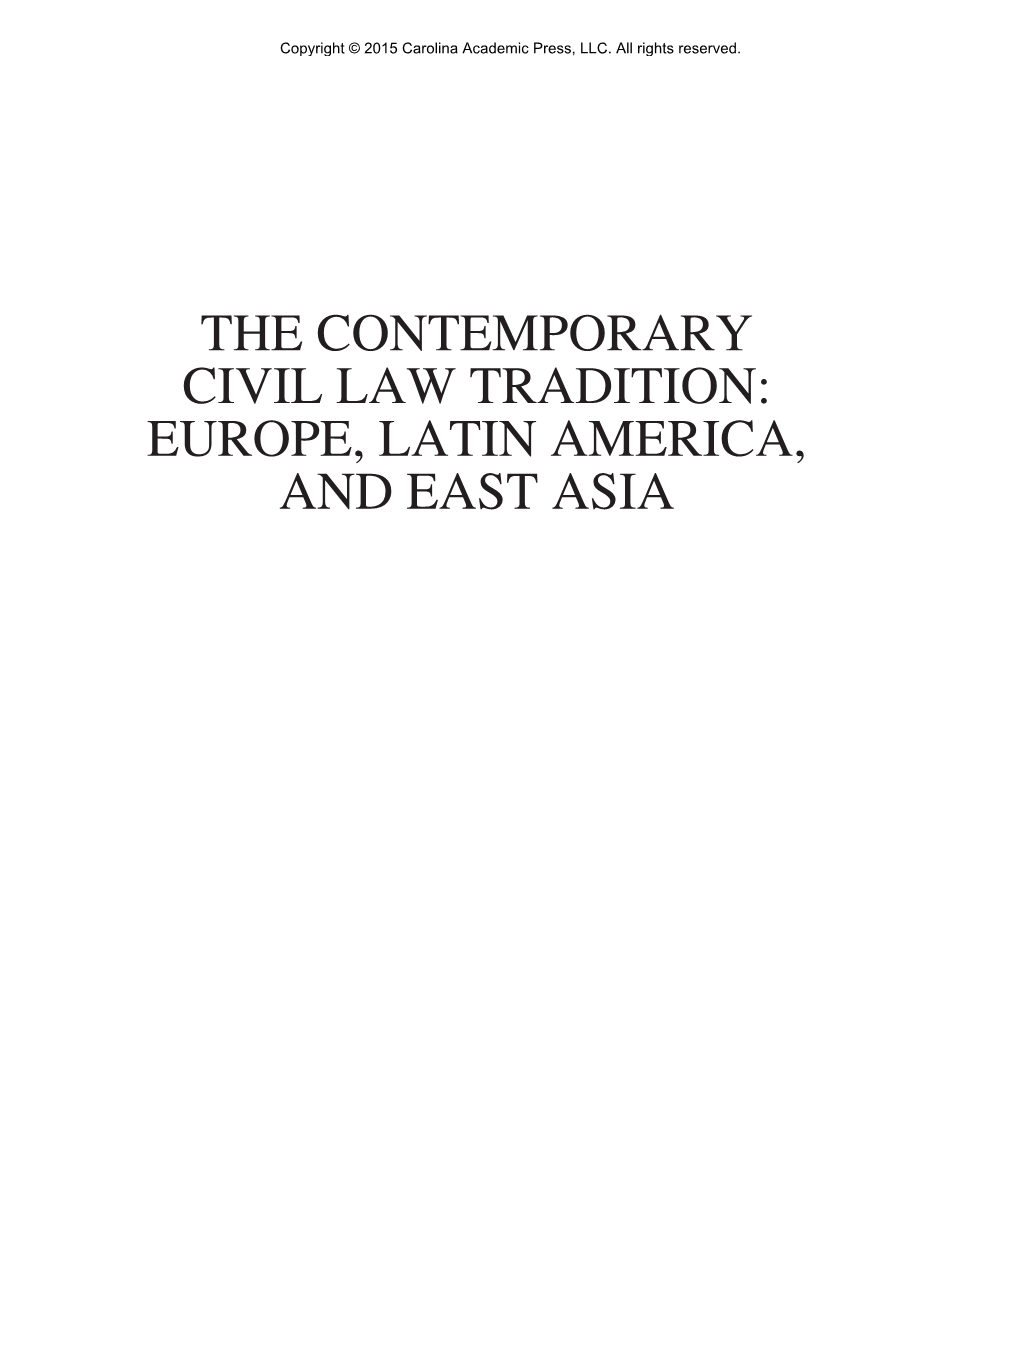 THE CONTEMPORARY CIVIL LAW TRADITION: EUROPE, LATIN AMERICA, and EAST ASIA Copyright © 2015 Carolina Academic Press, LLC